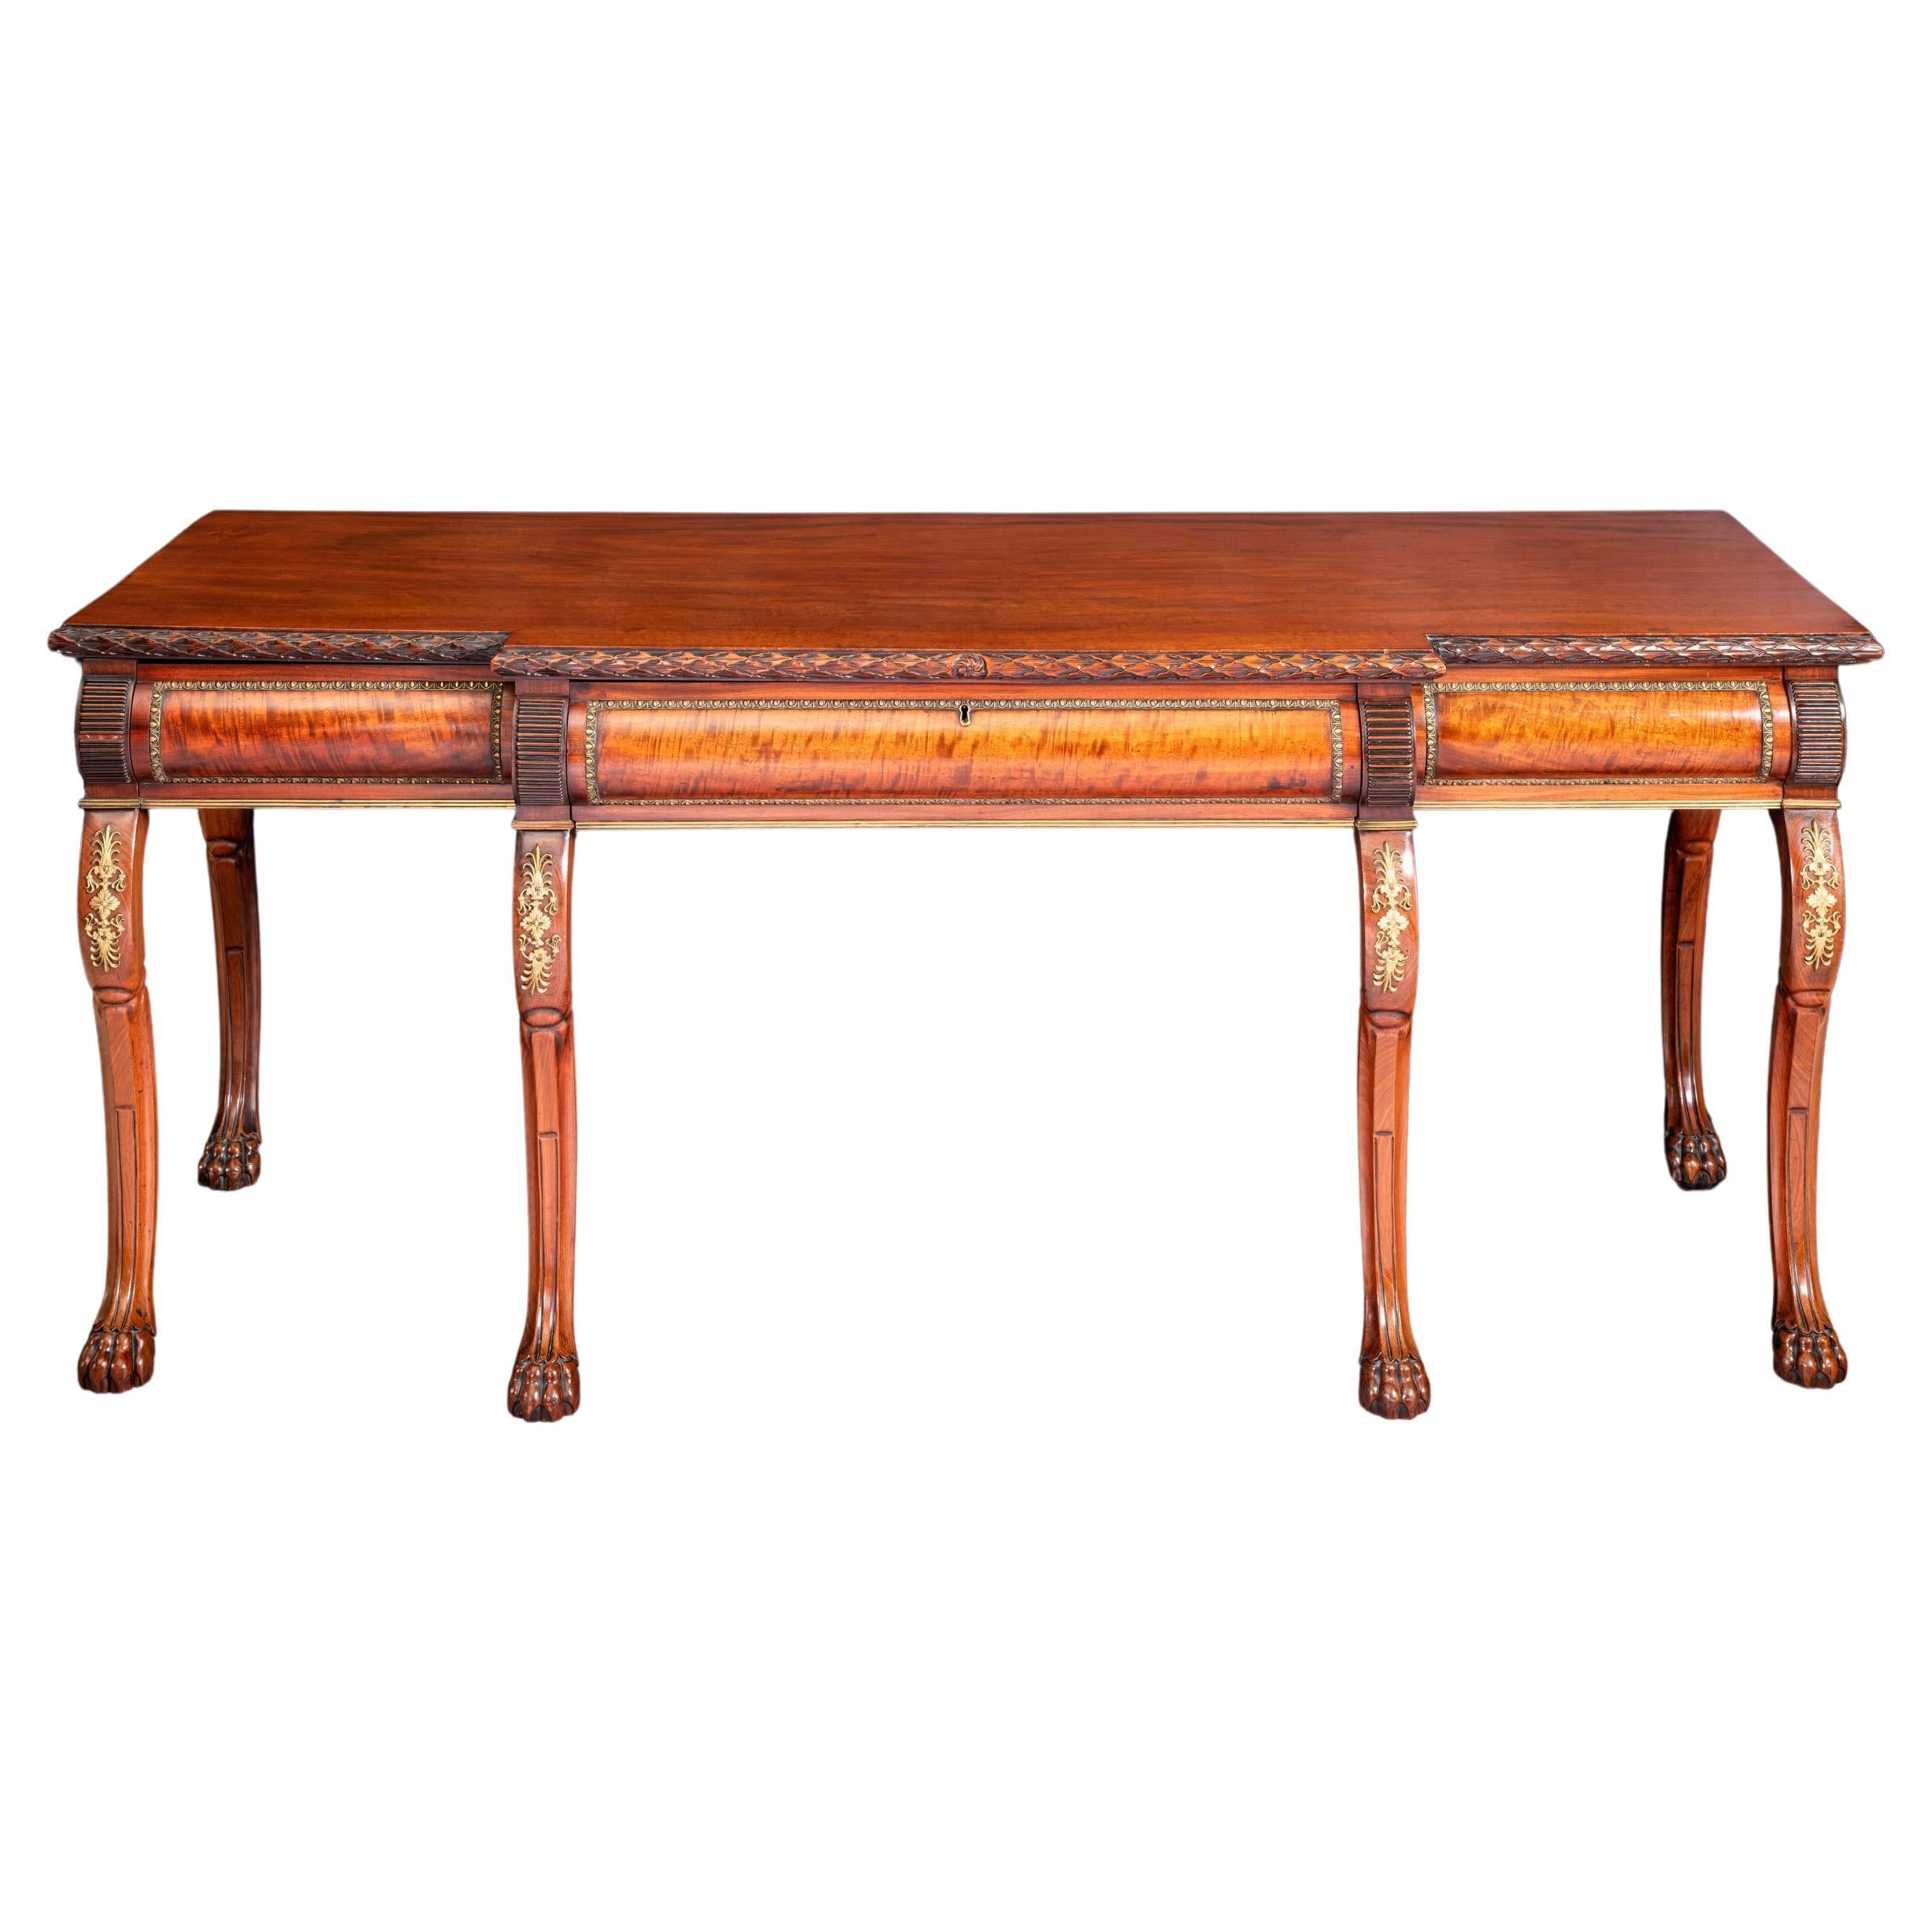 Early 19th Century Irish Regency Console Table For Sale